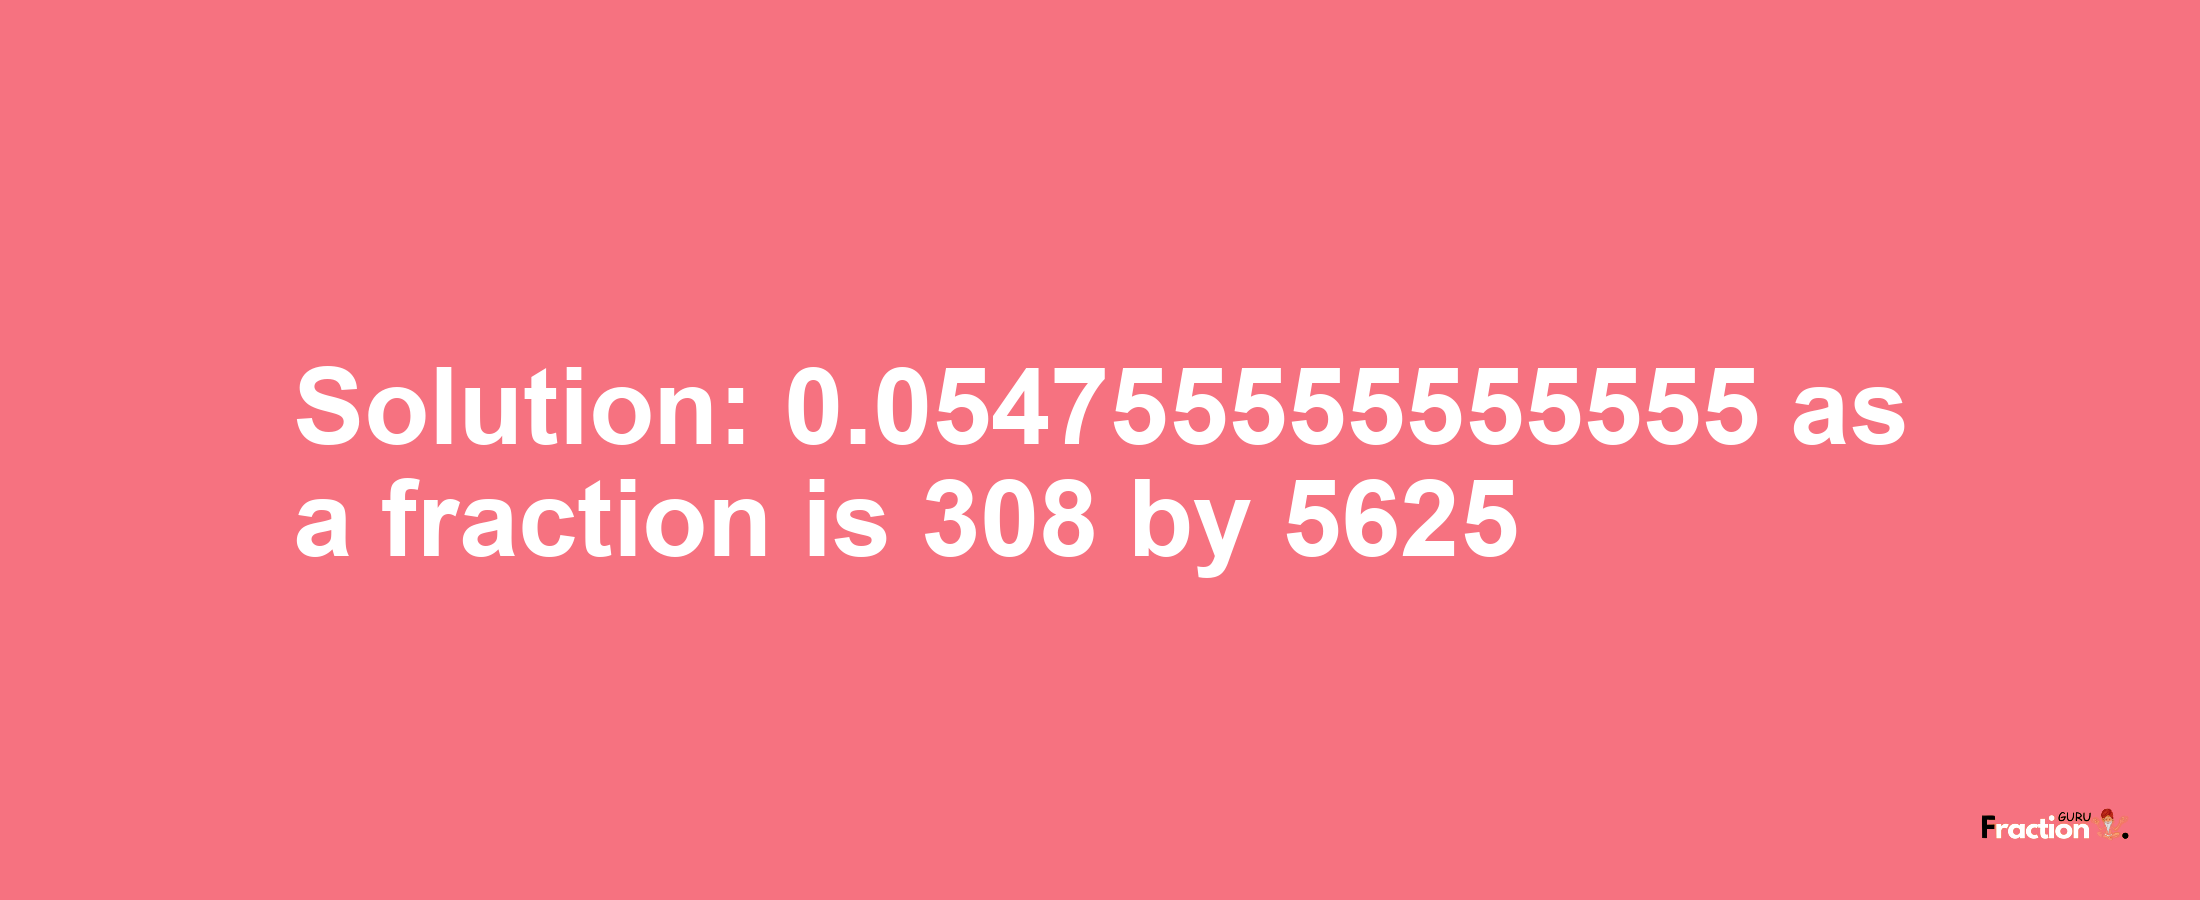 Solution:0.054755555555555 as a fraction is 308/5625